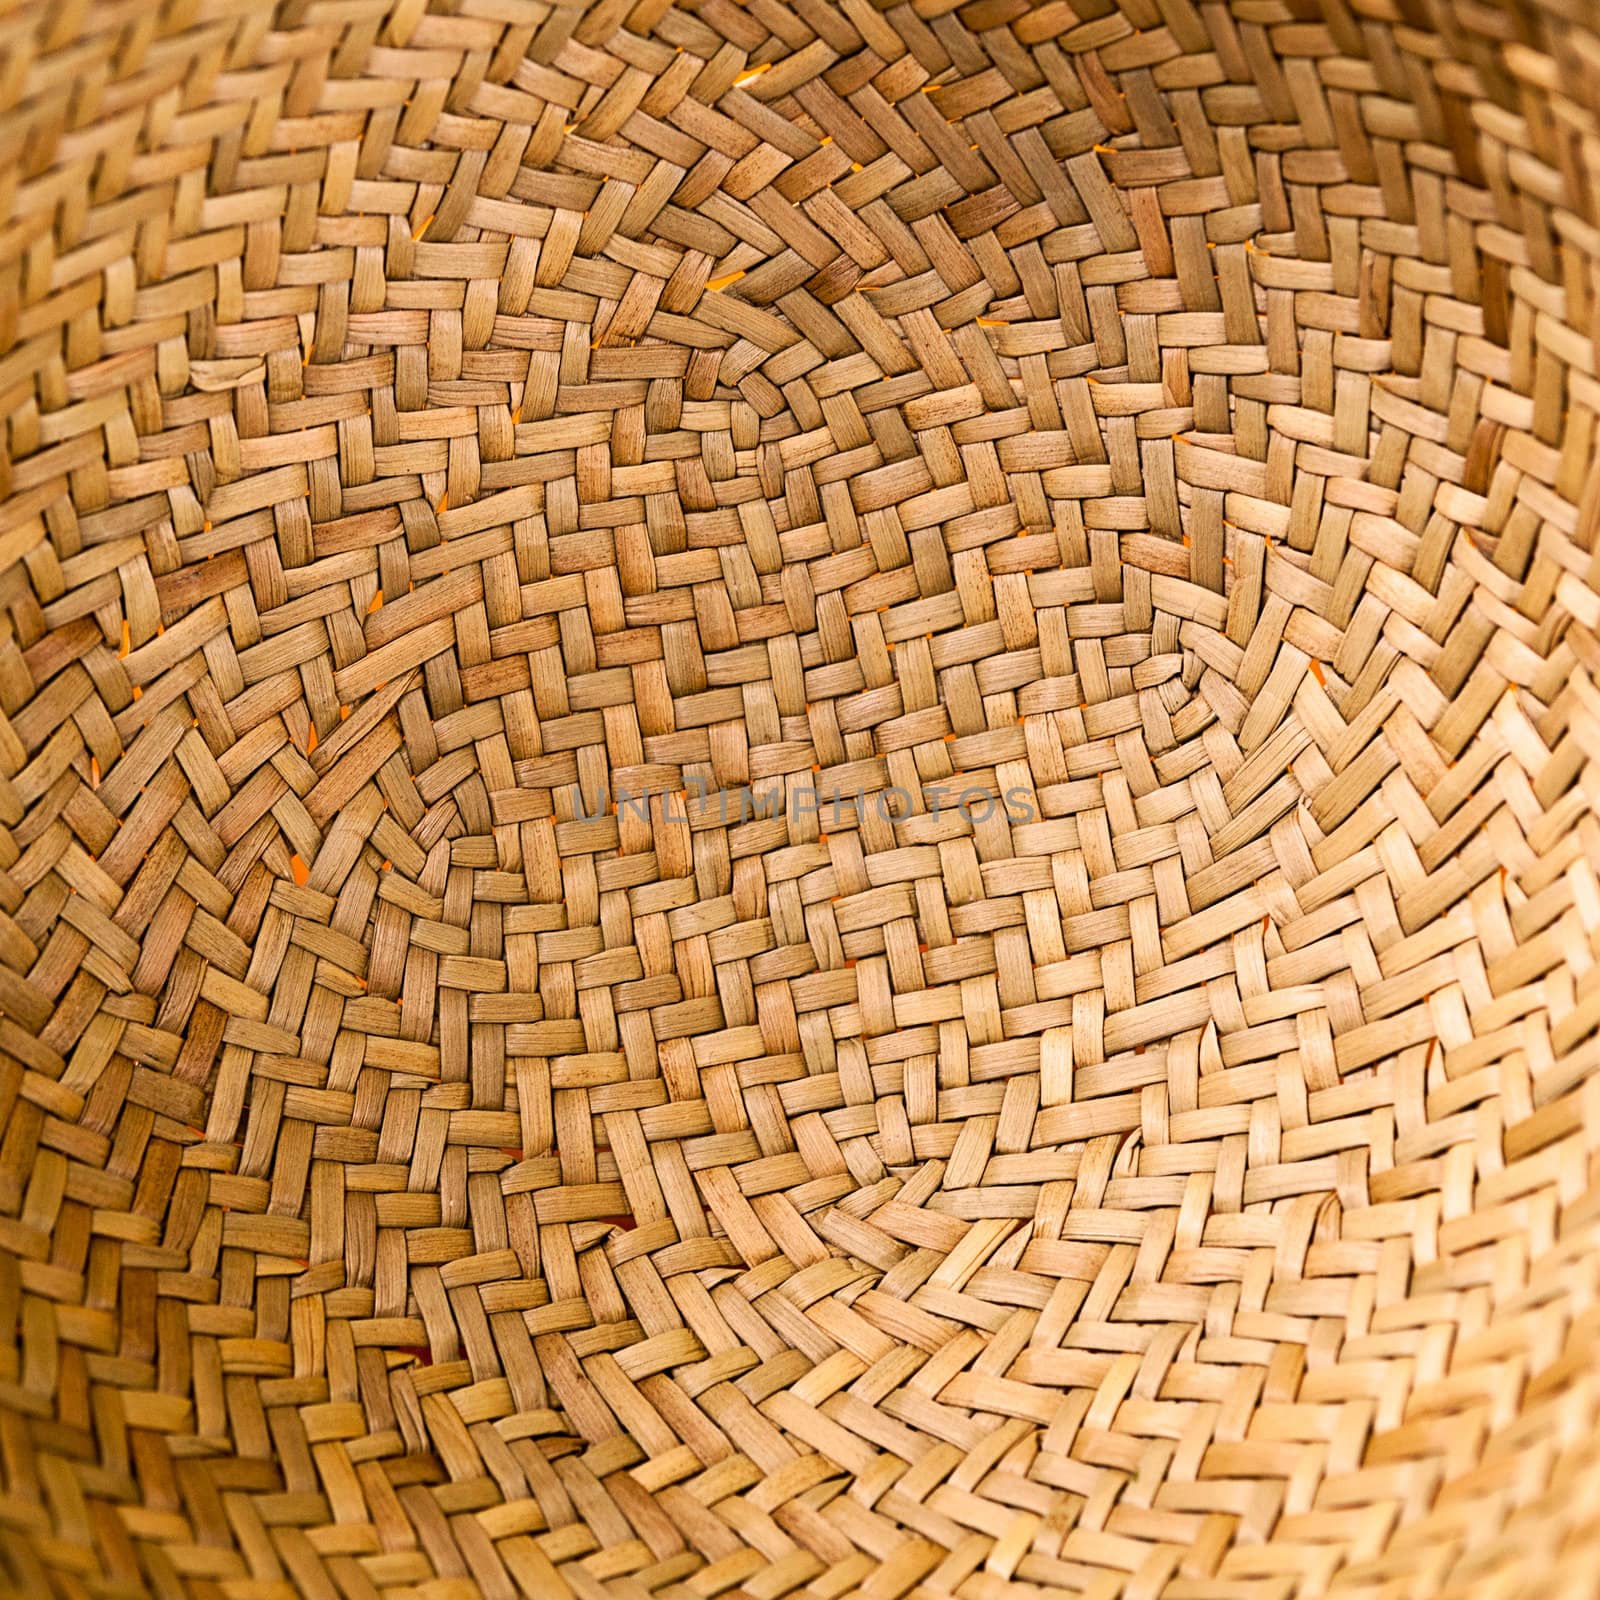 Background. Wicker texture close-up photo. Circle